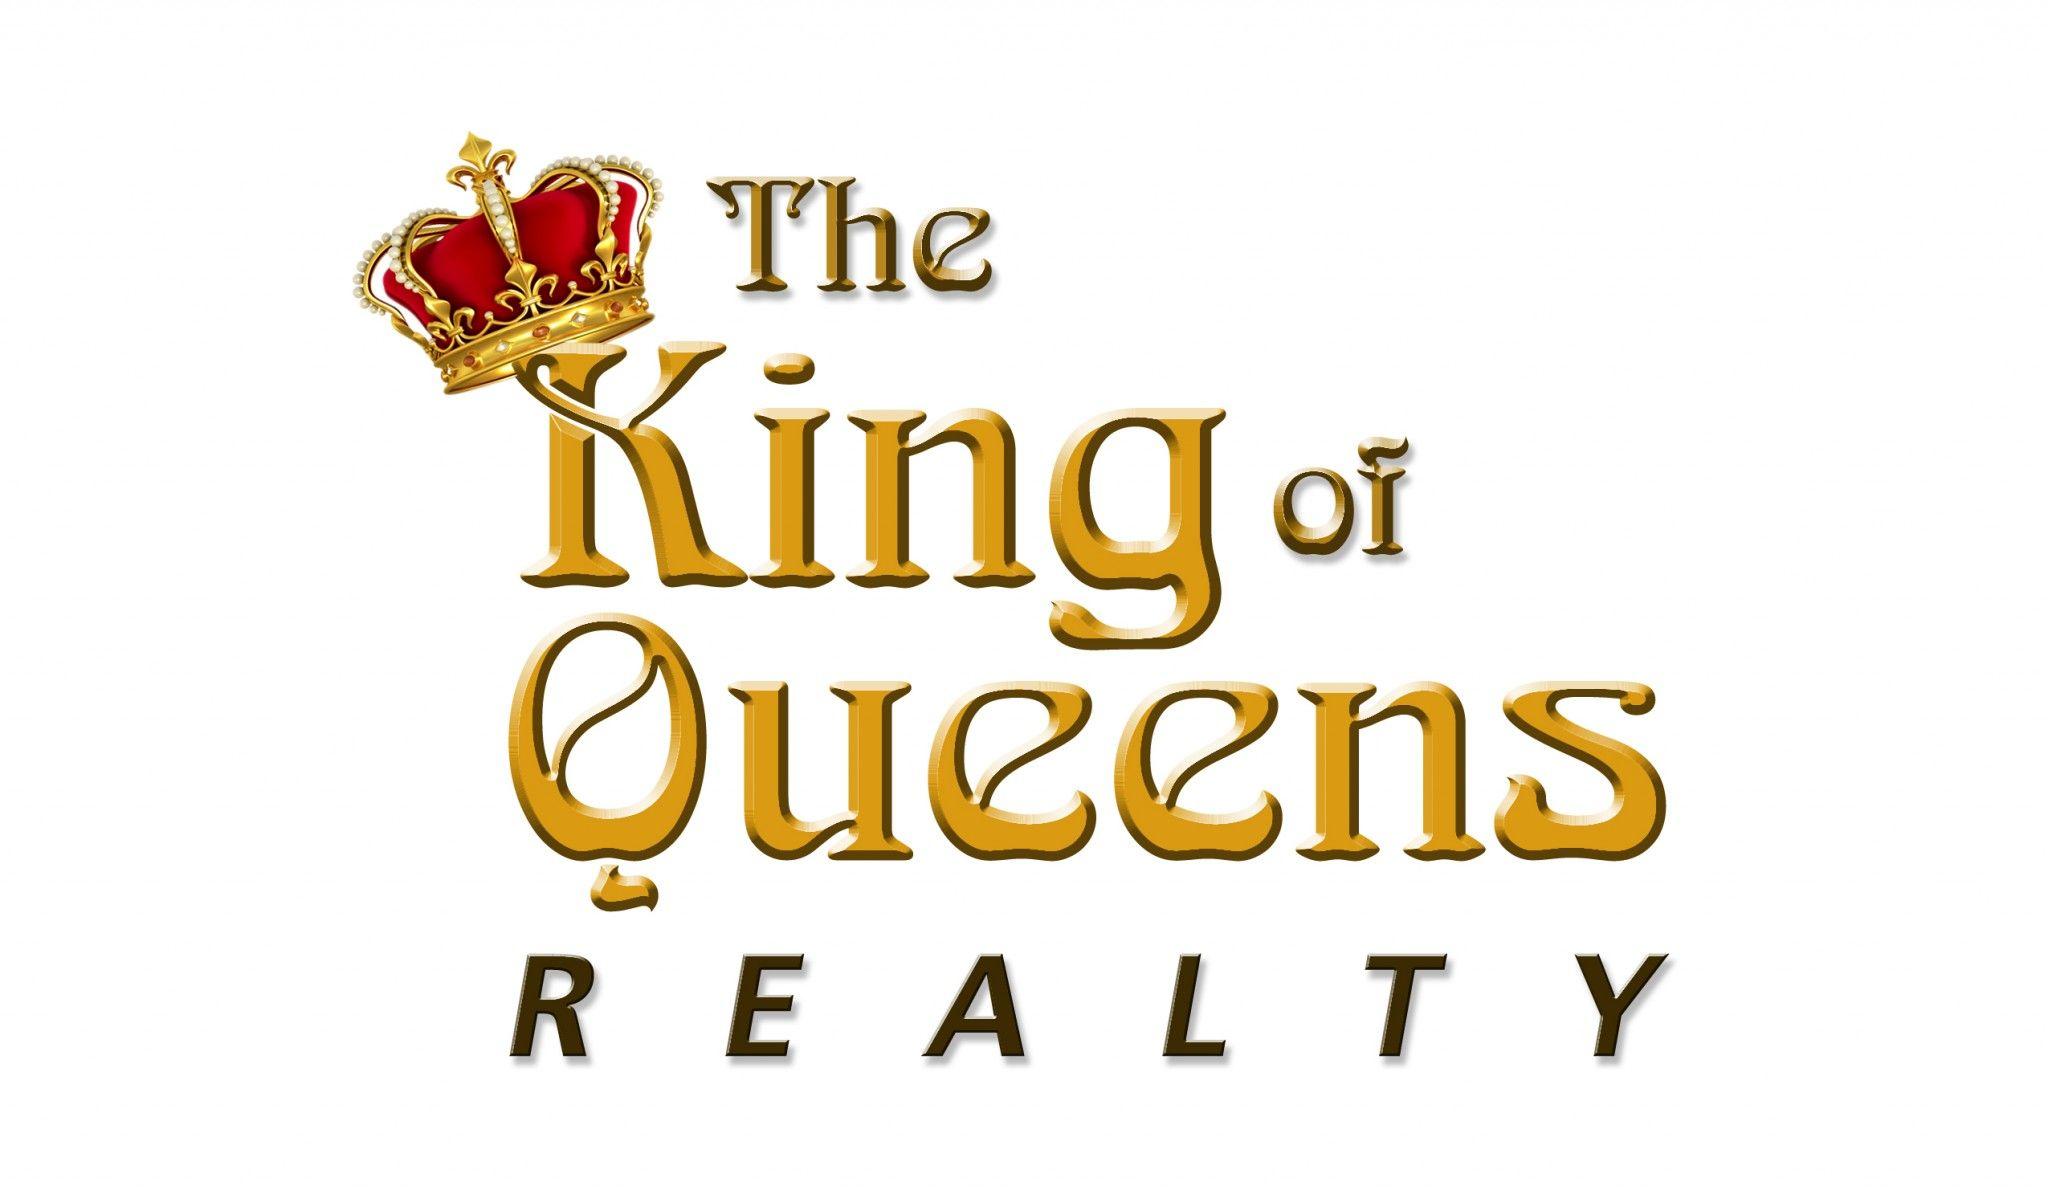 The King of Queens Logo - About. The King of Queens Realty